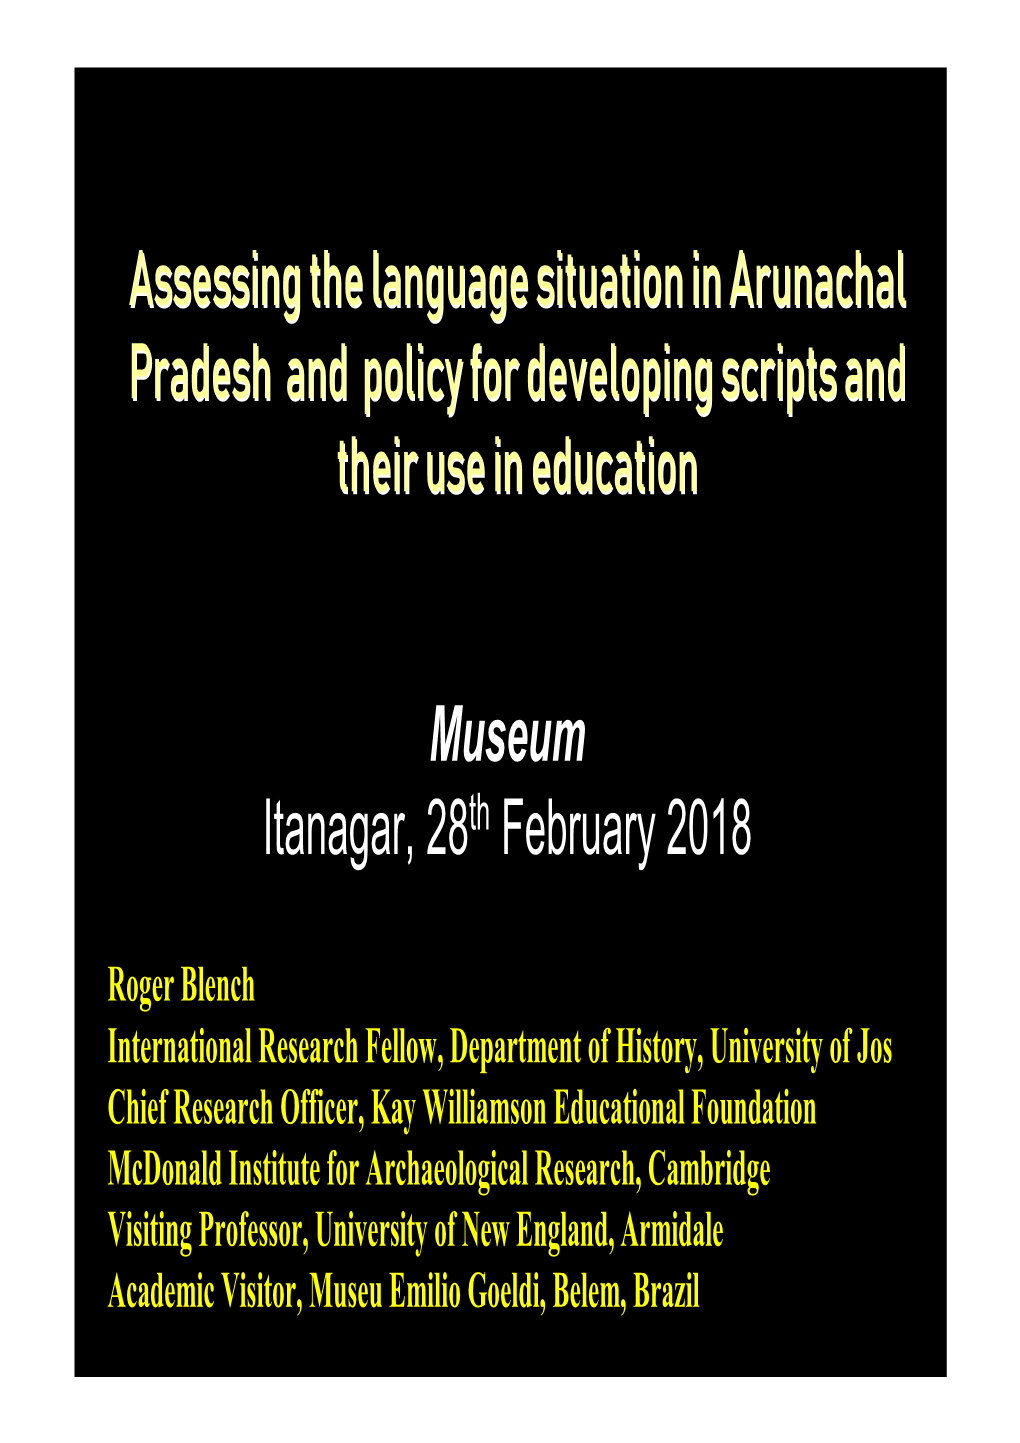 Assessing the Language Situation in Arunachal Pradesh and Policy For